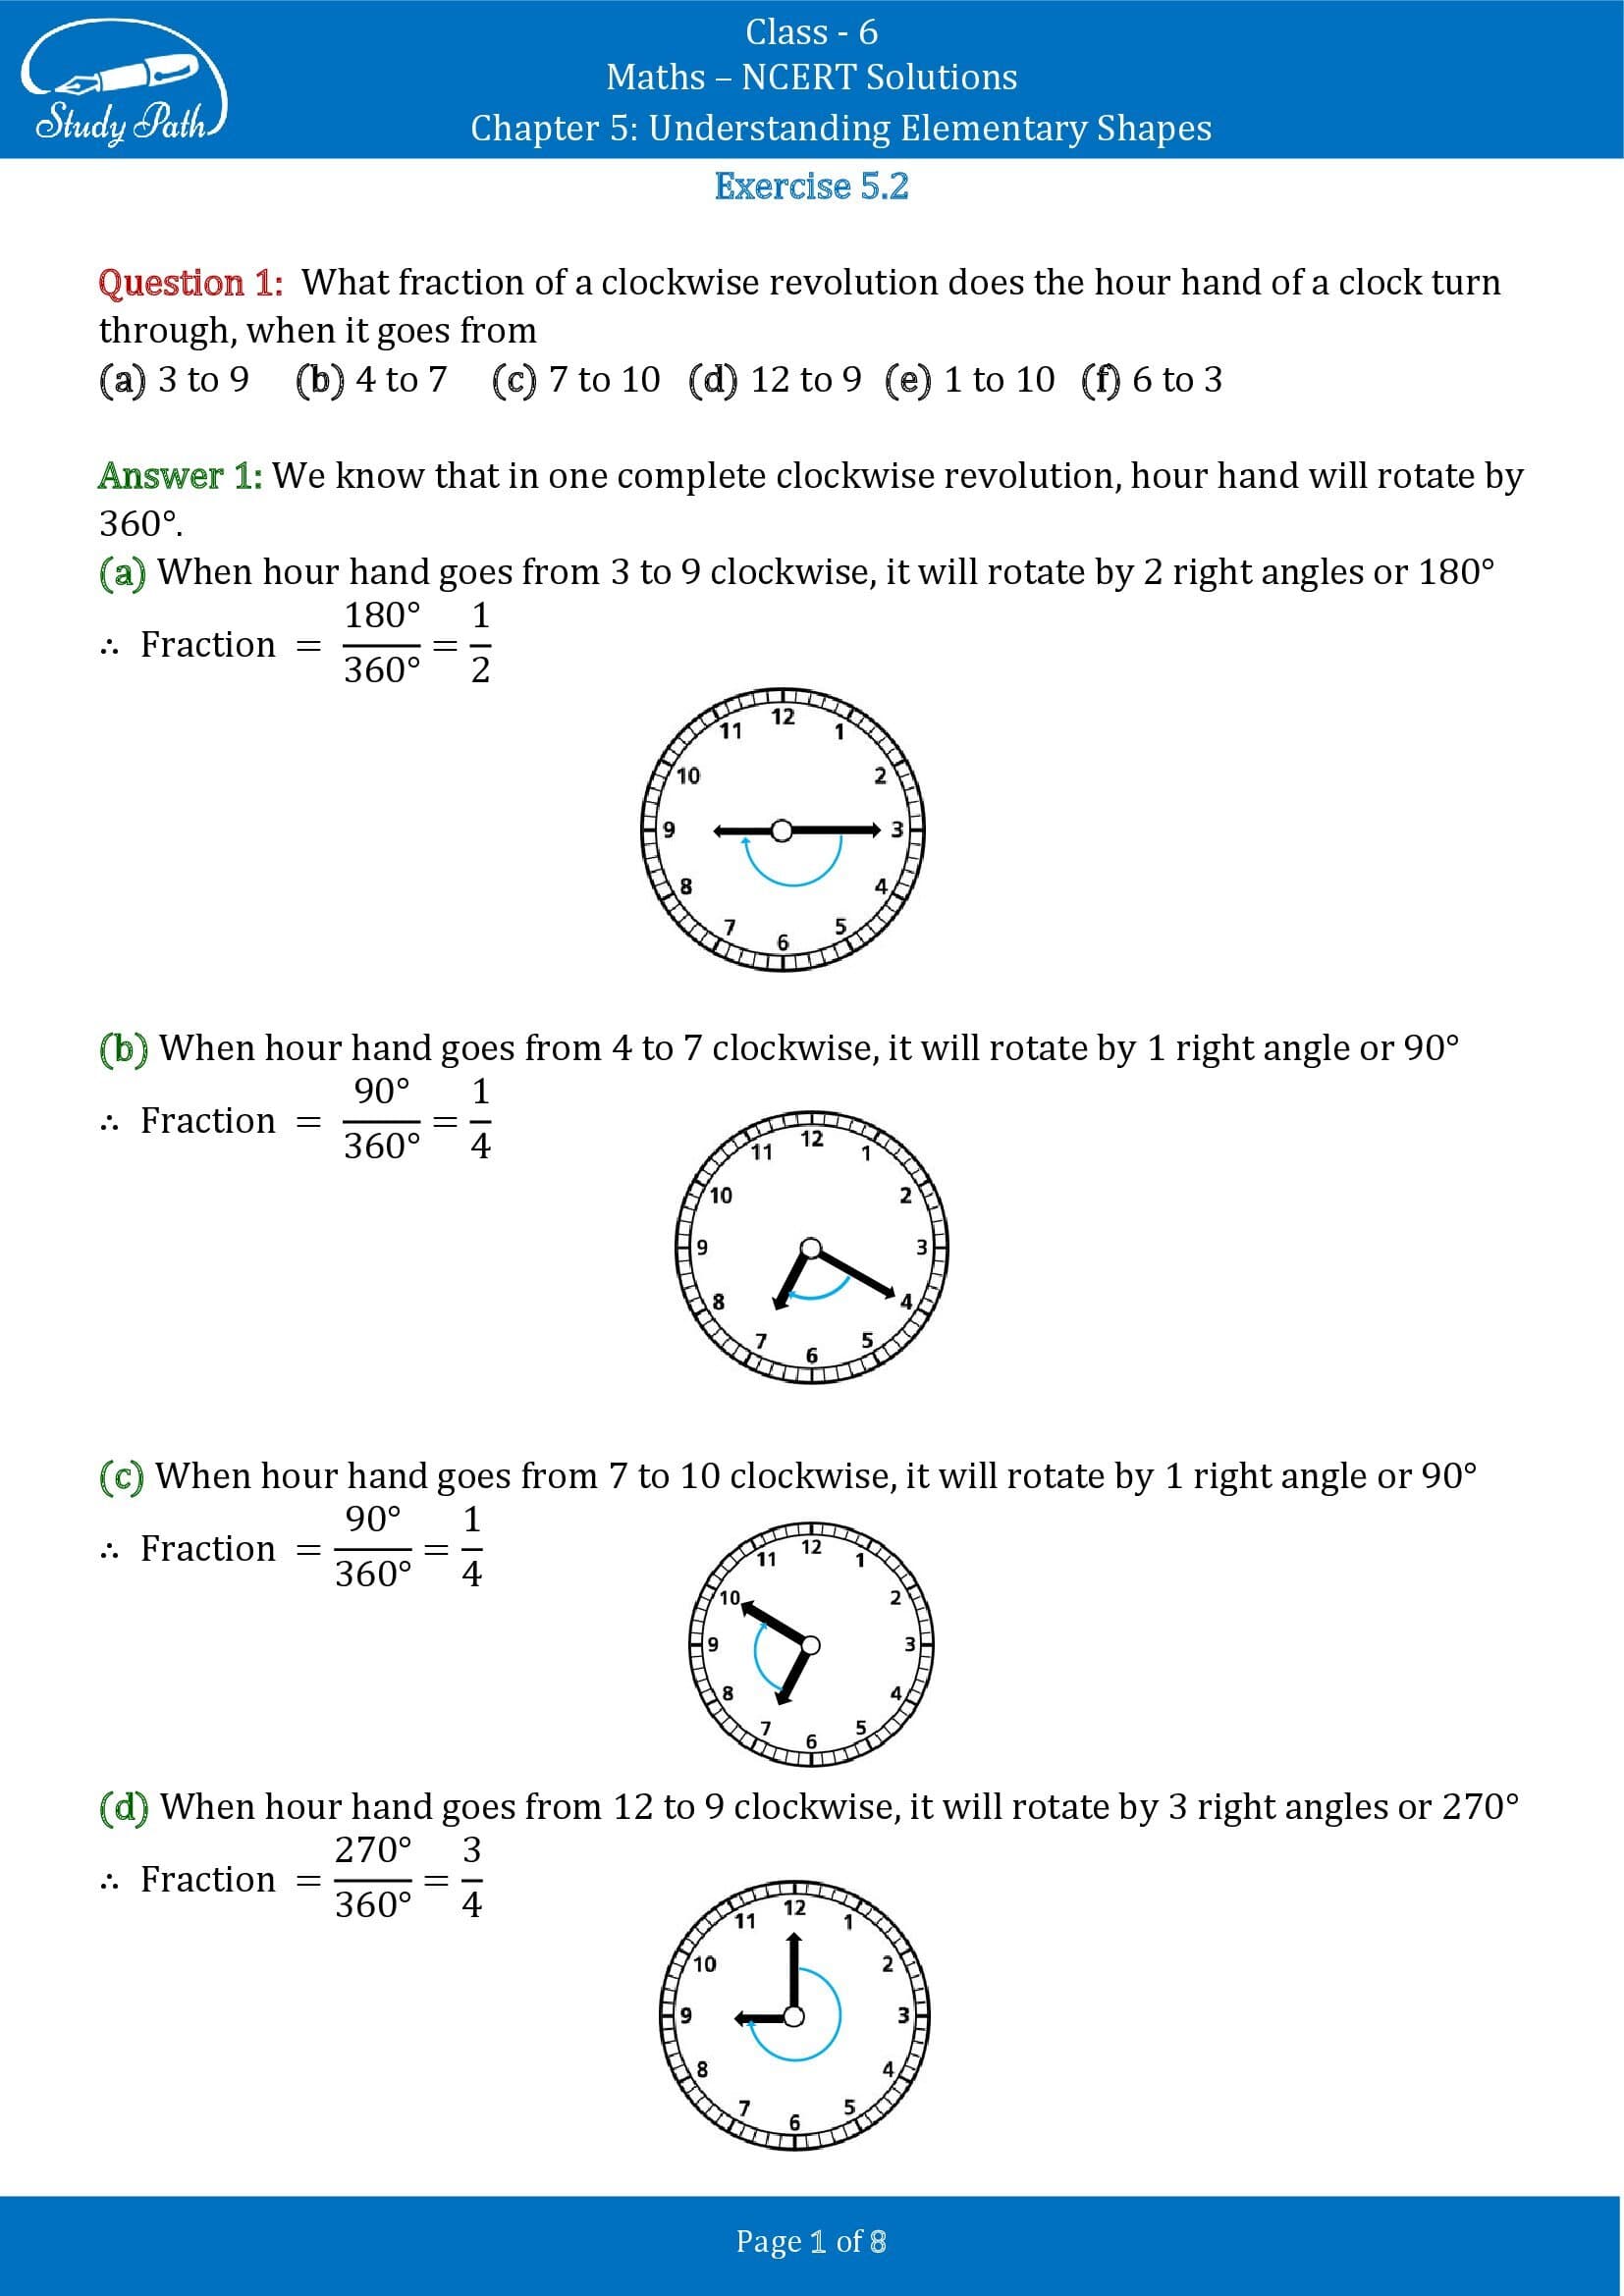 NCERT Solutions for Class 6 Maths Chapter 5 Understanding Elementary Shapes Exercise 5.2 00001